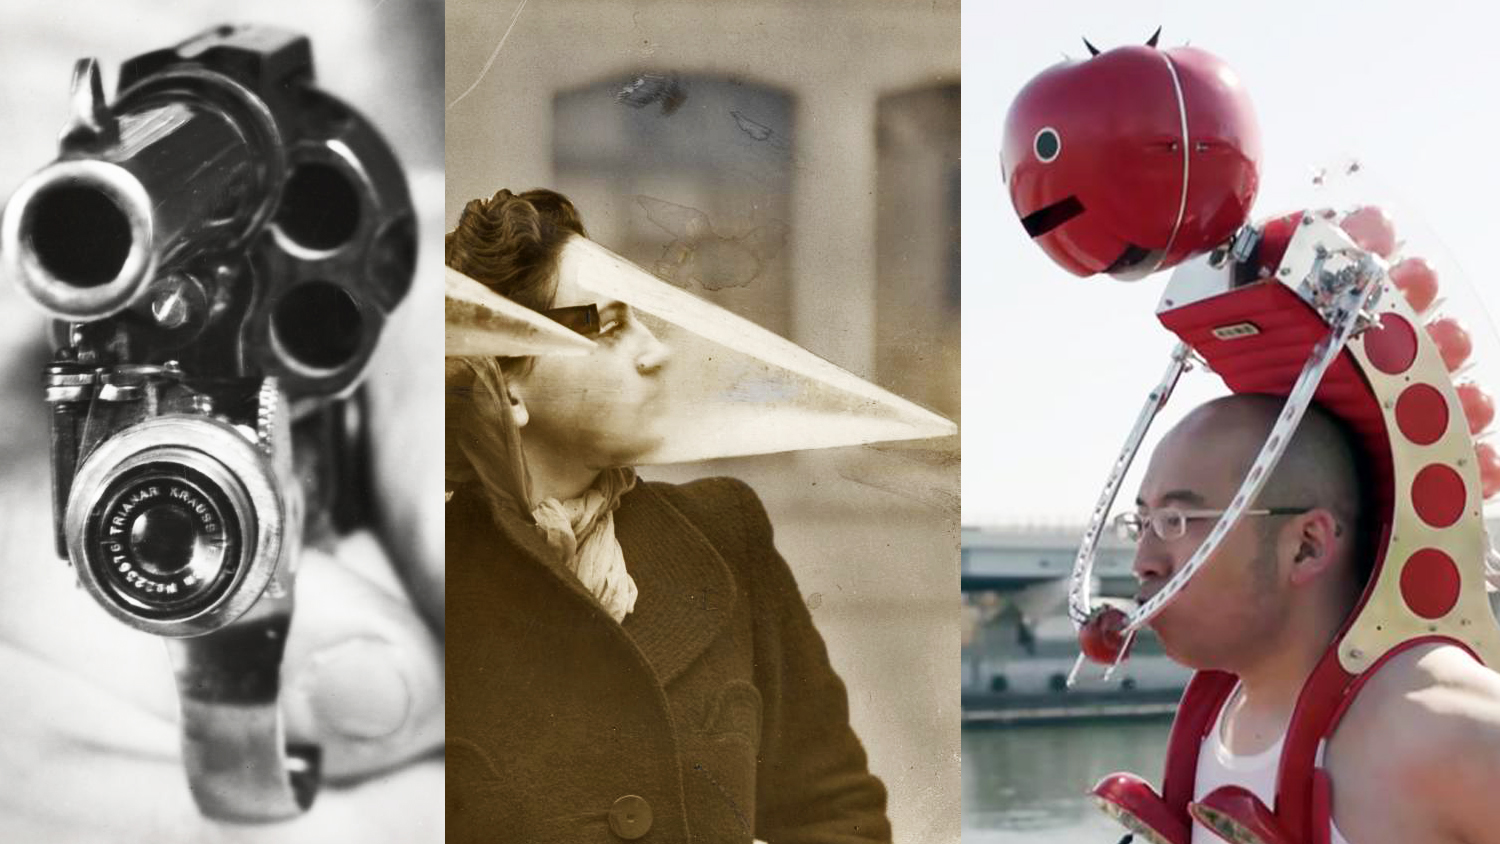 From Quirky to Bizarre: The Top 10 Weird Gadgets